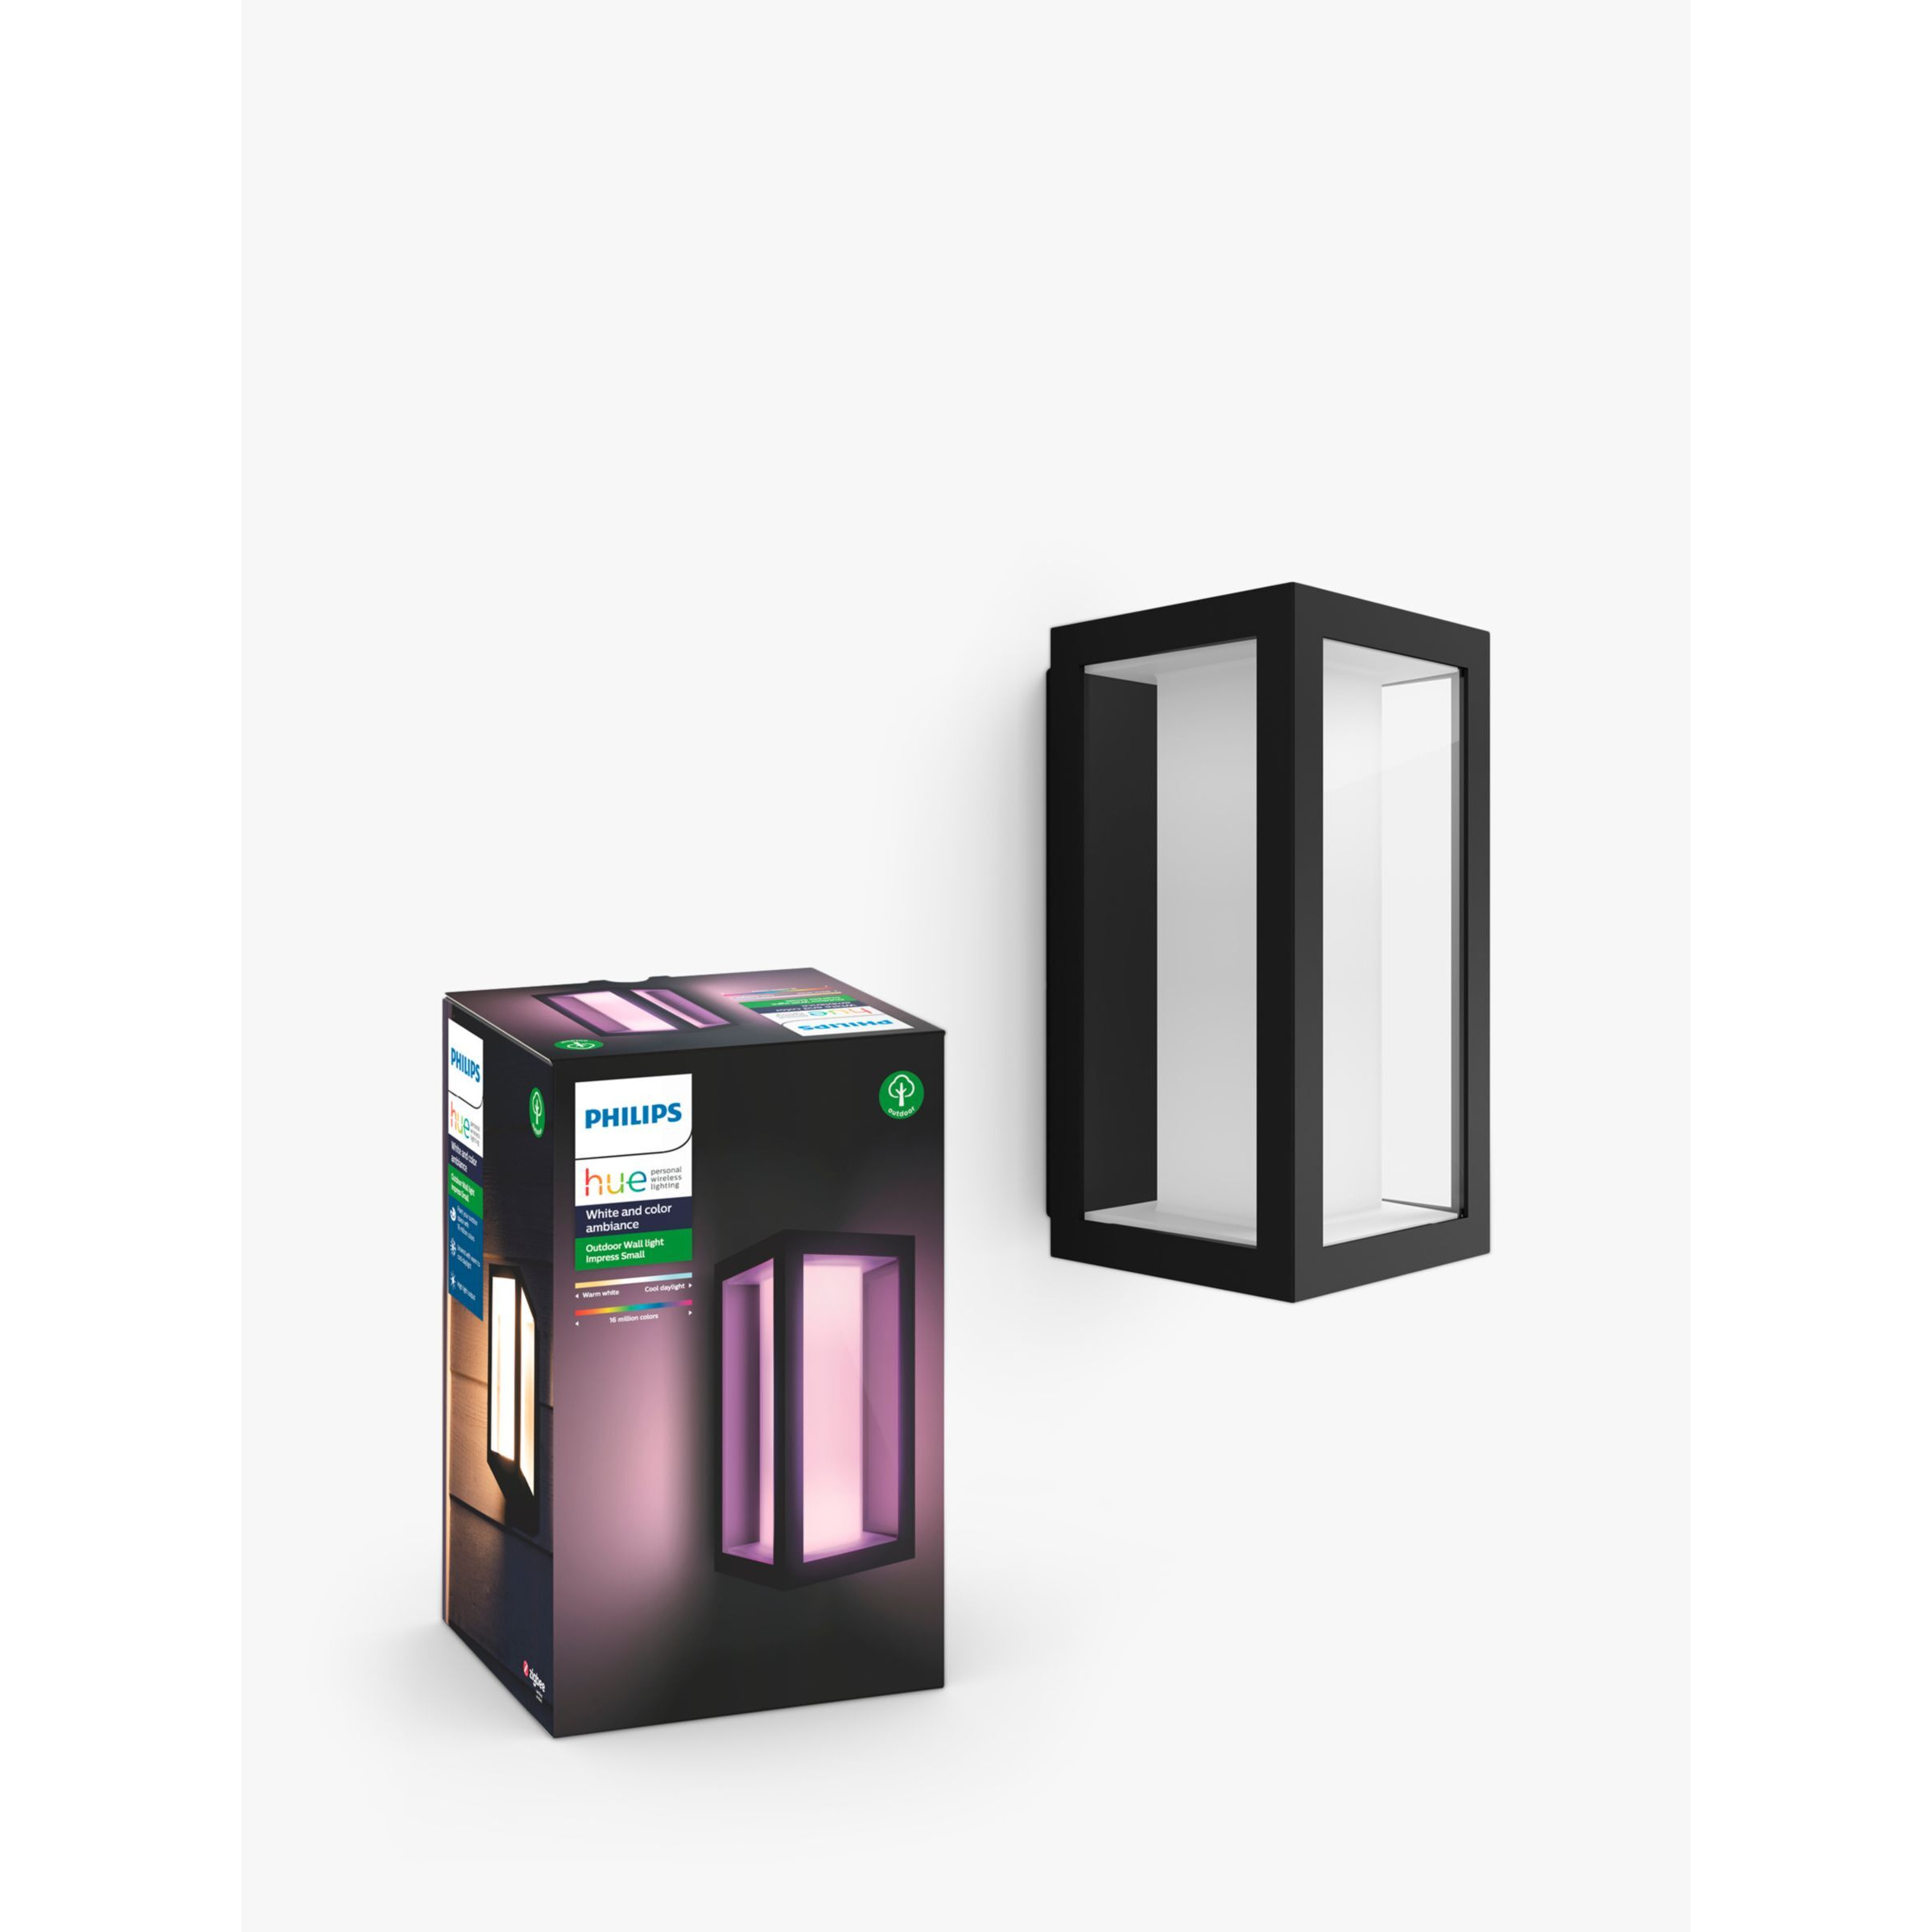 Philips Hue White and Colour Ambiance Impress LED Smart Outdoor Wall Light, Black - image 1